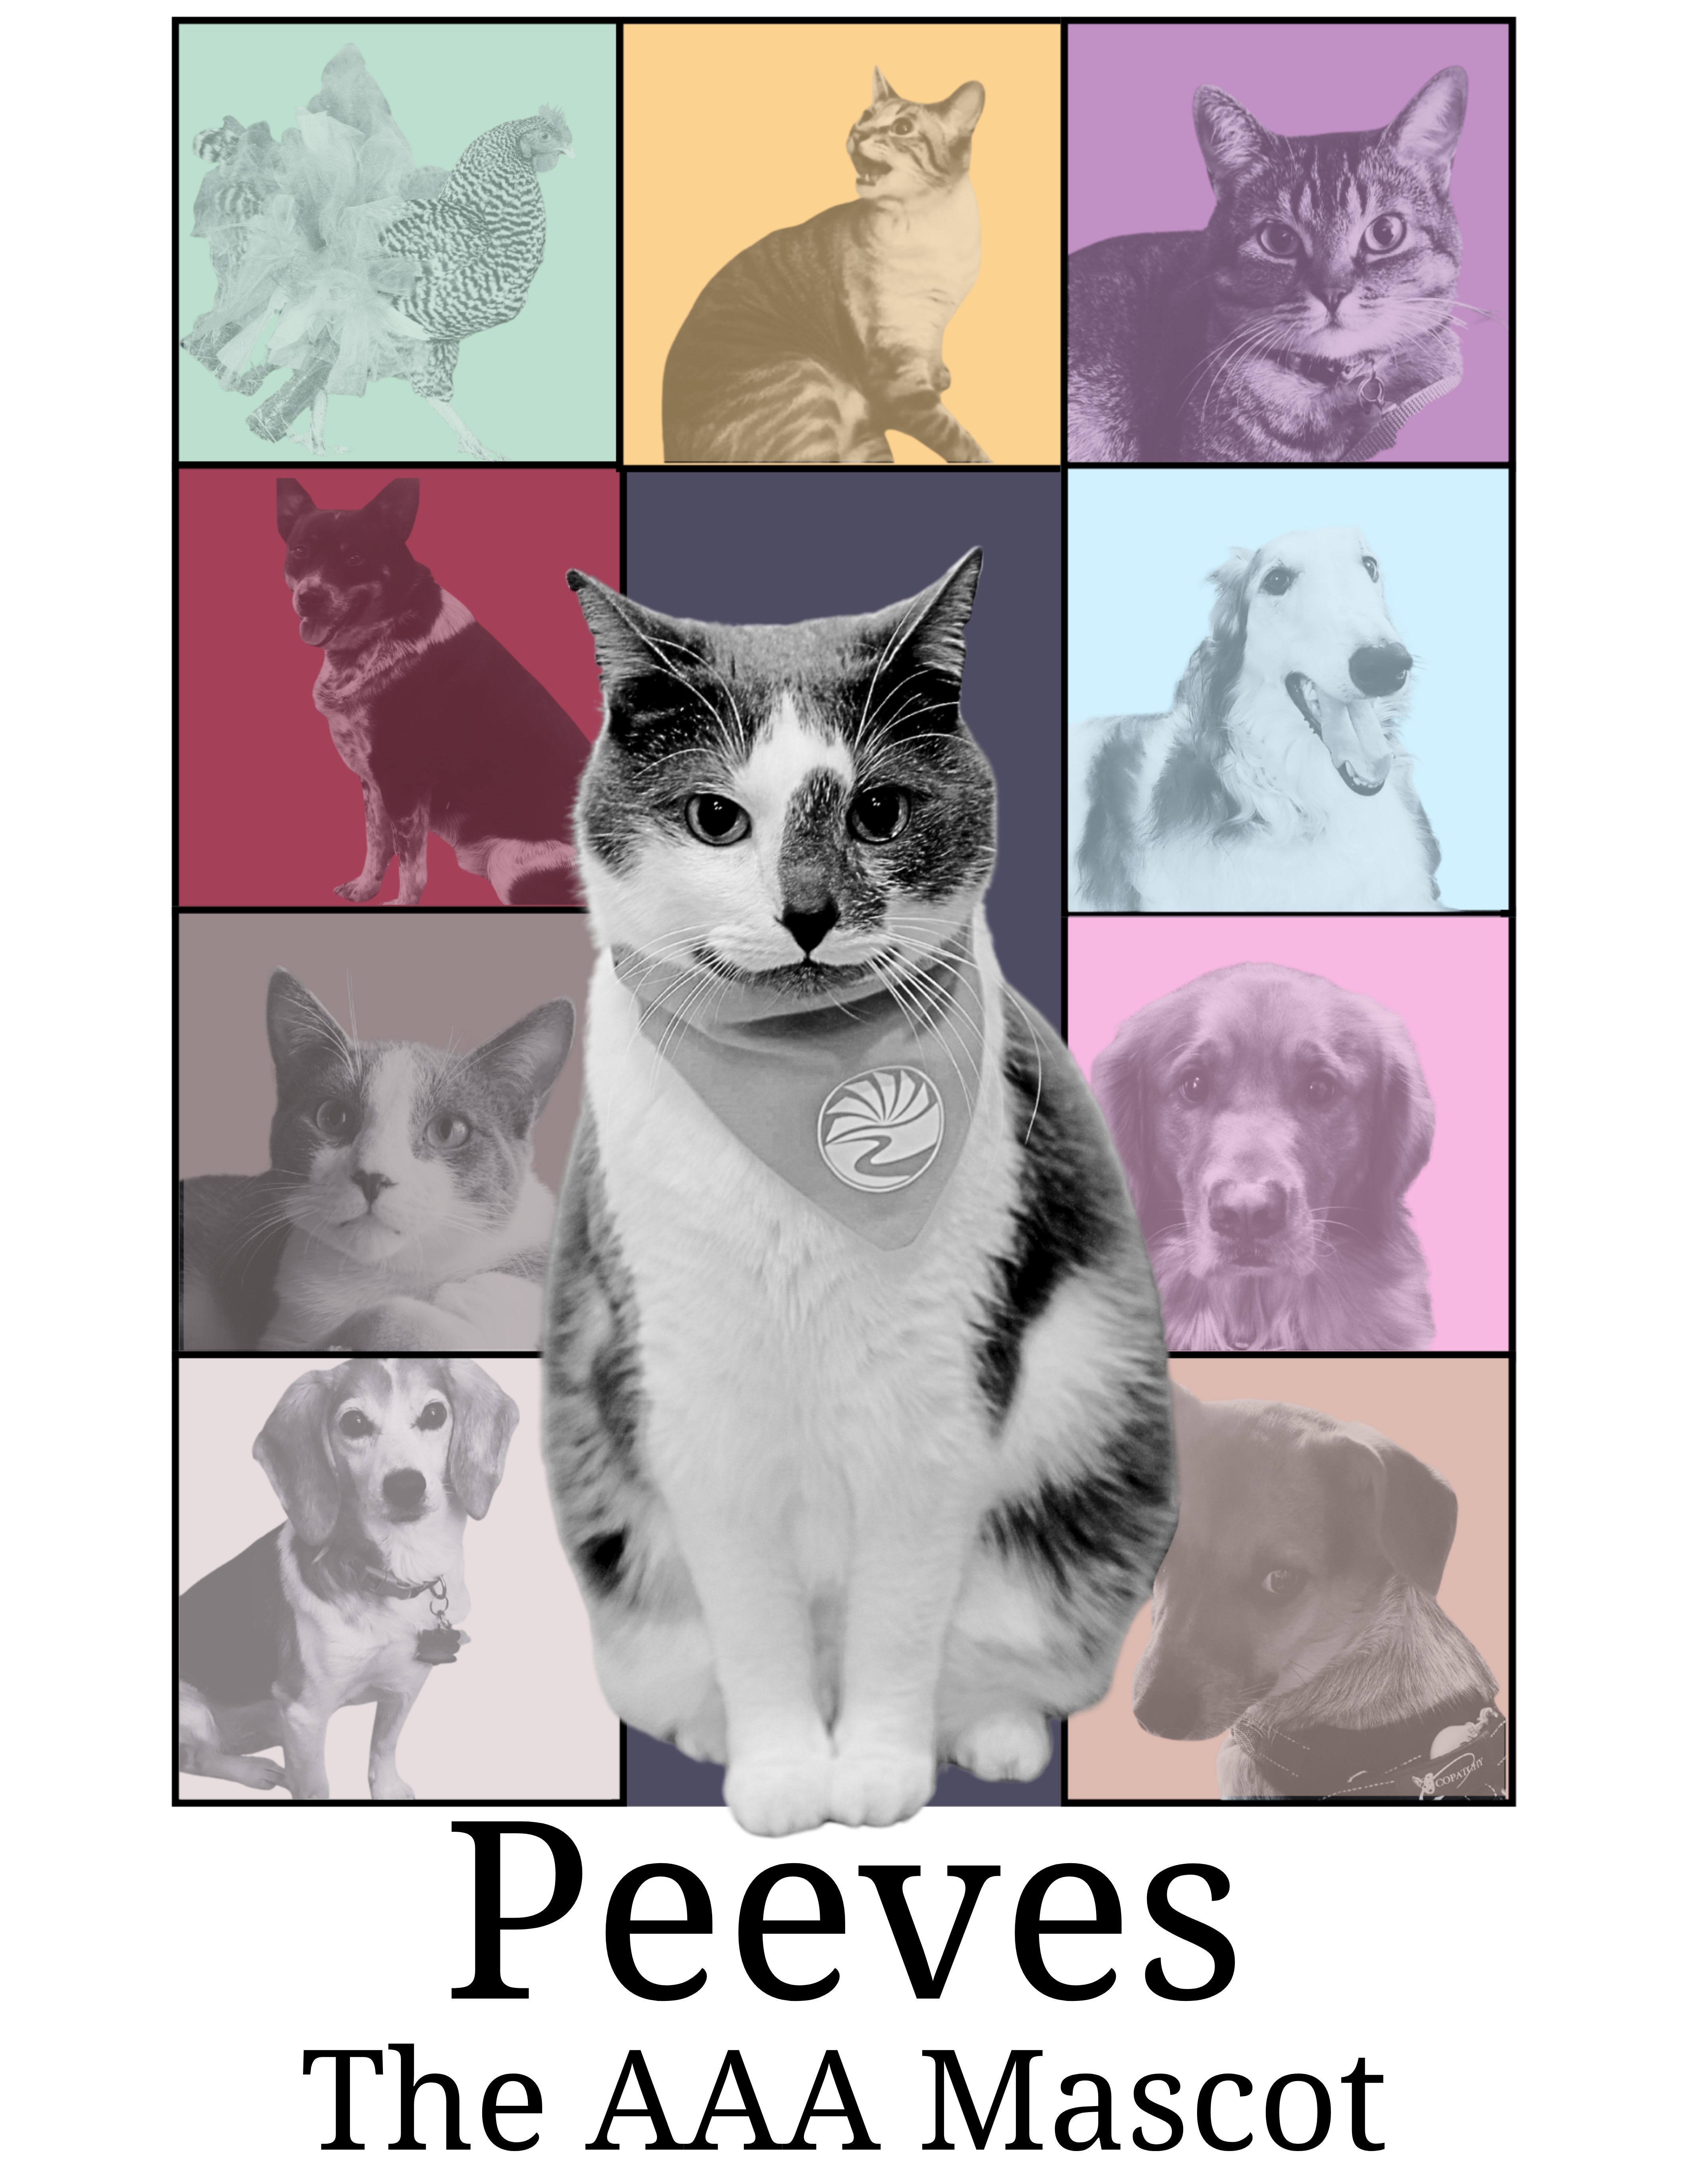 9 animals are featured in colored squares around a central larger image of a cat, he is grey and white and wearing a bandana.